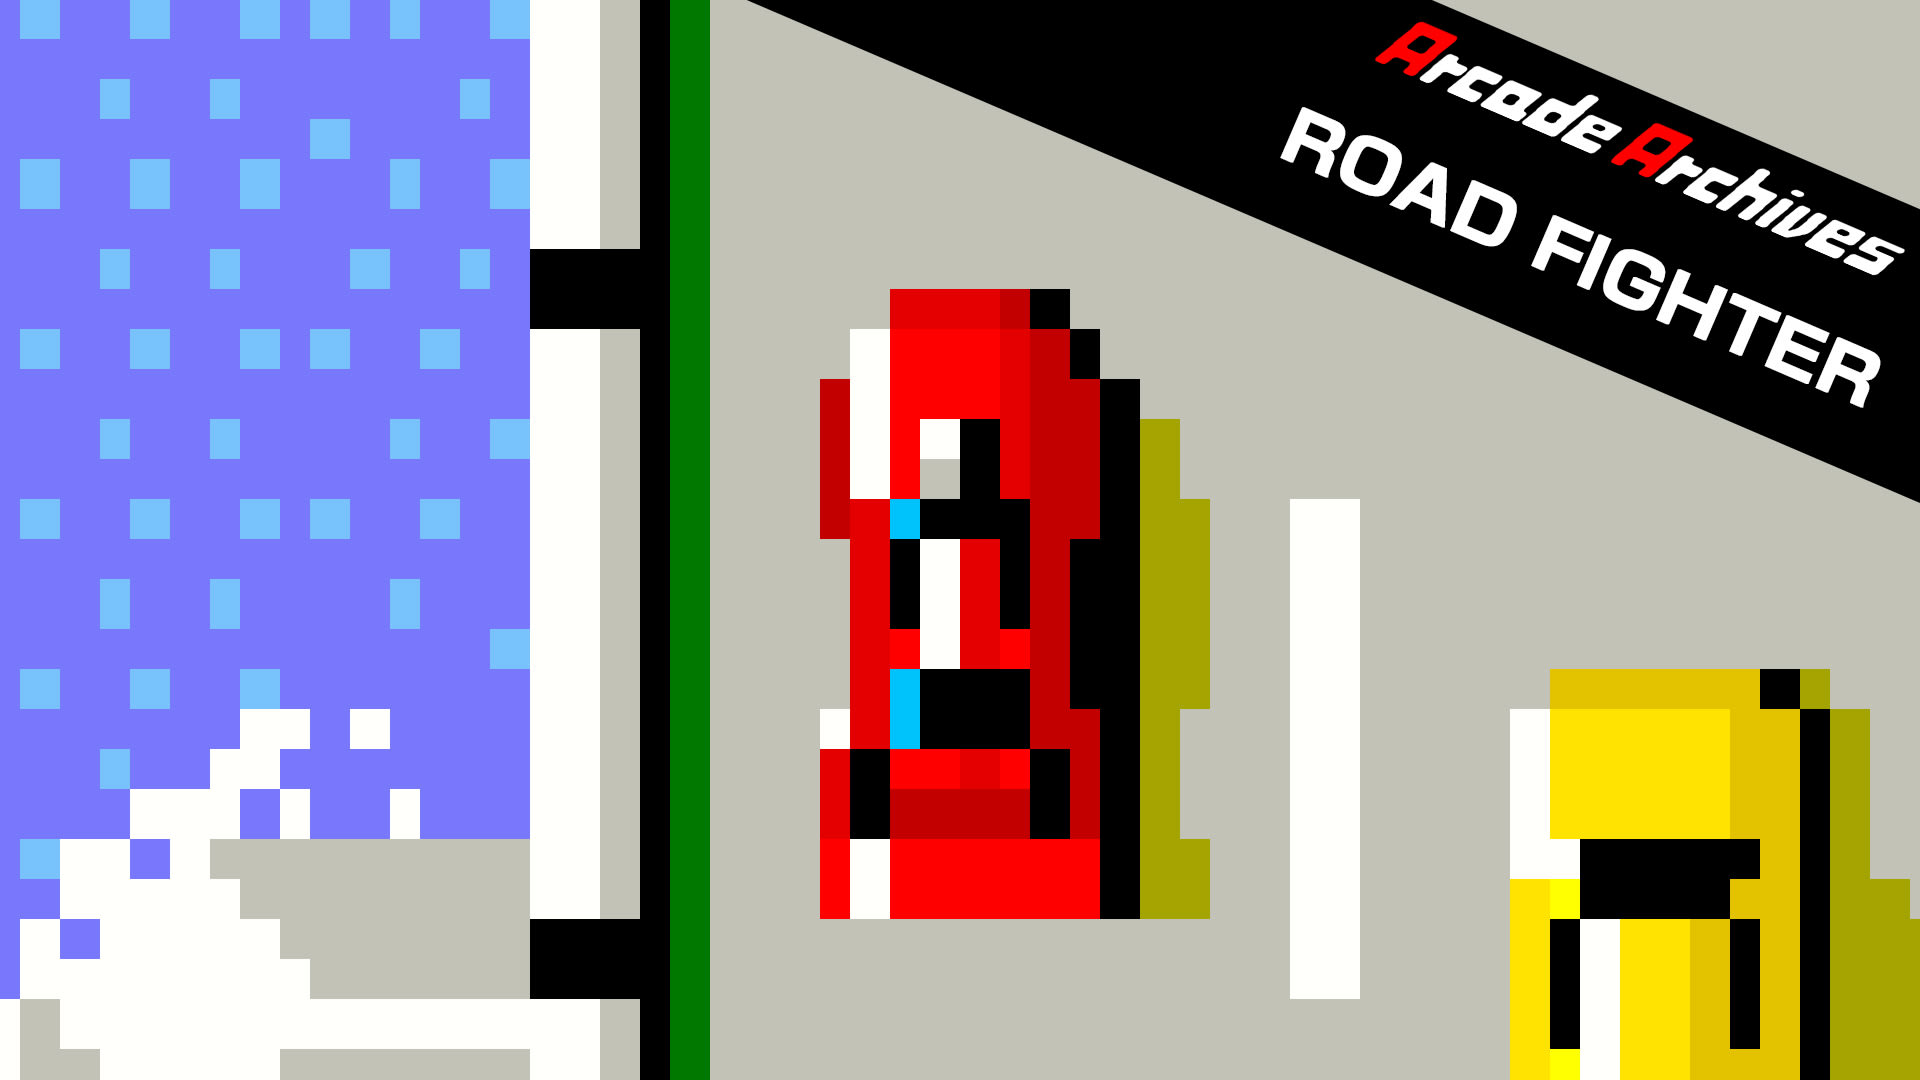 Arcade Archives ROAD FIGHTER